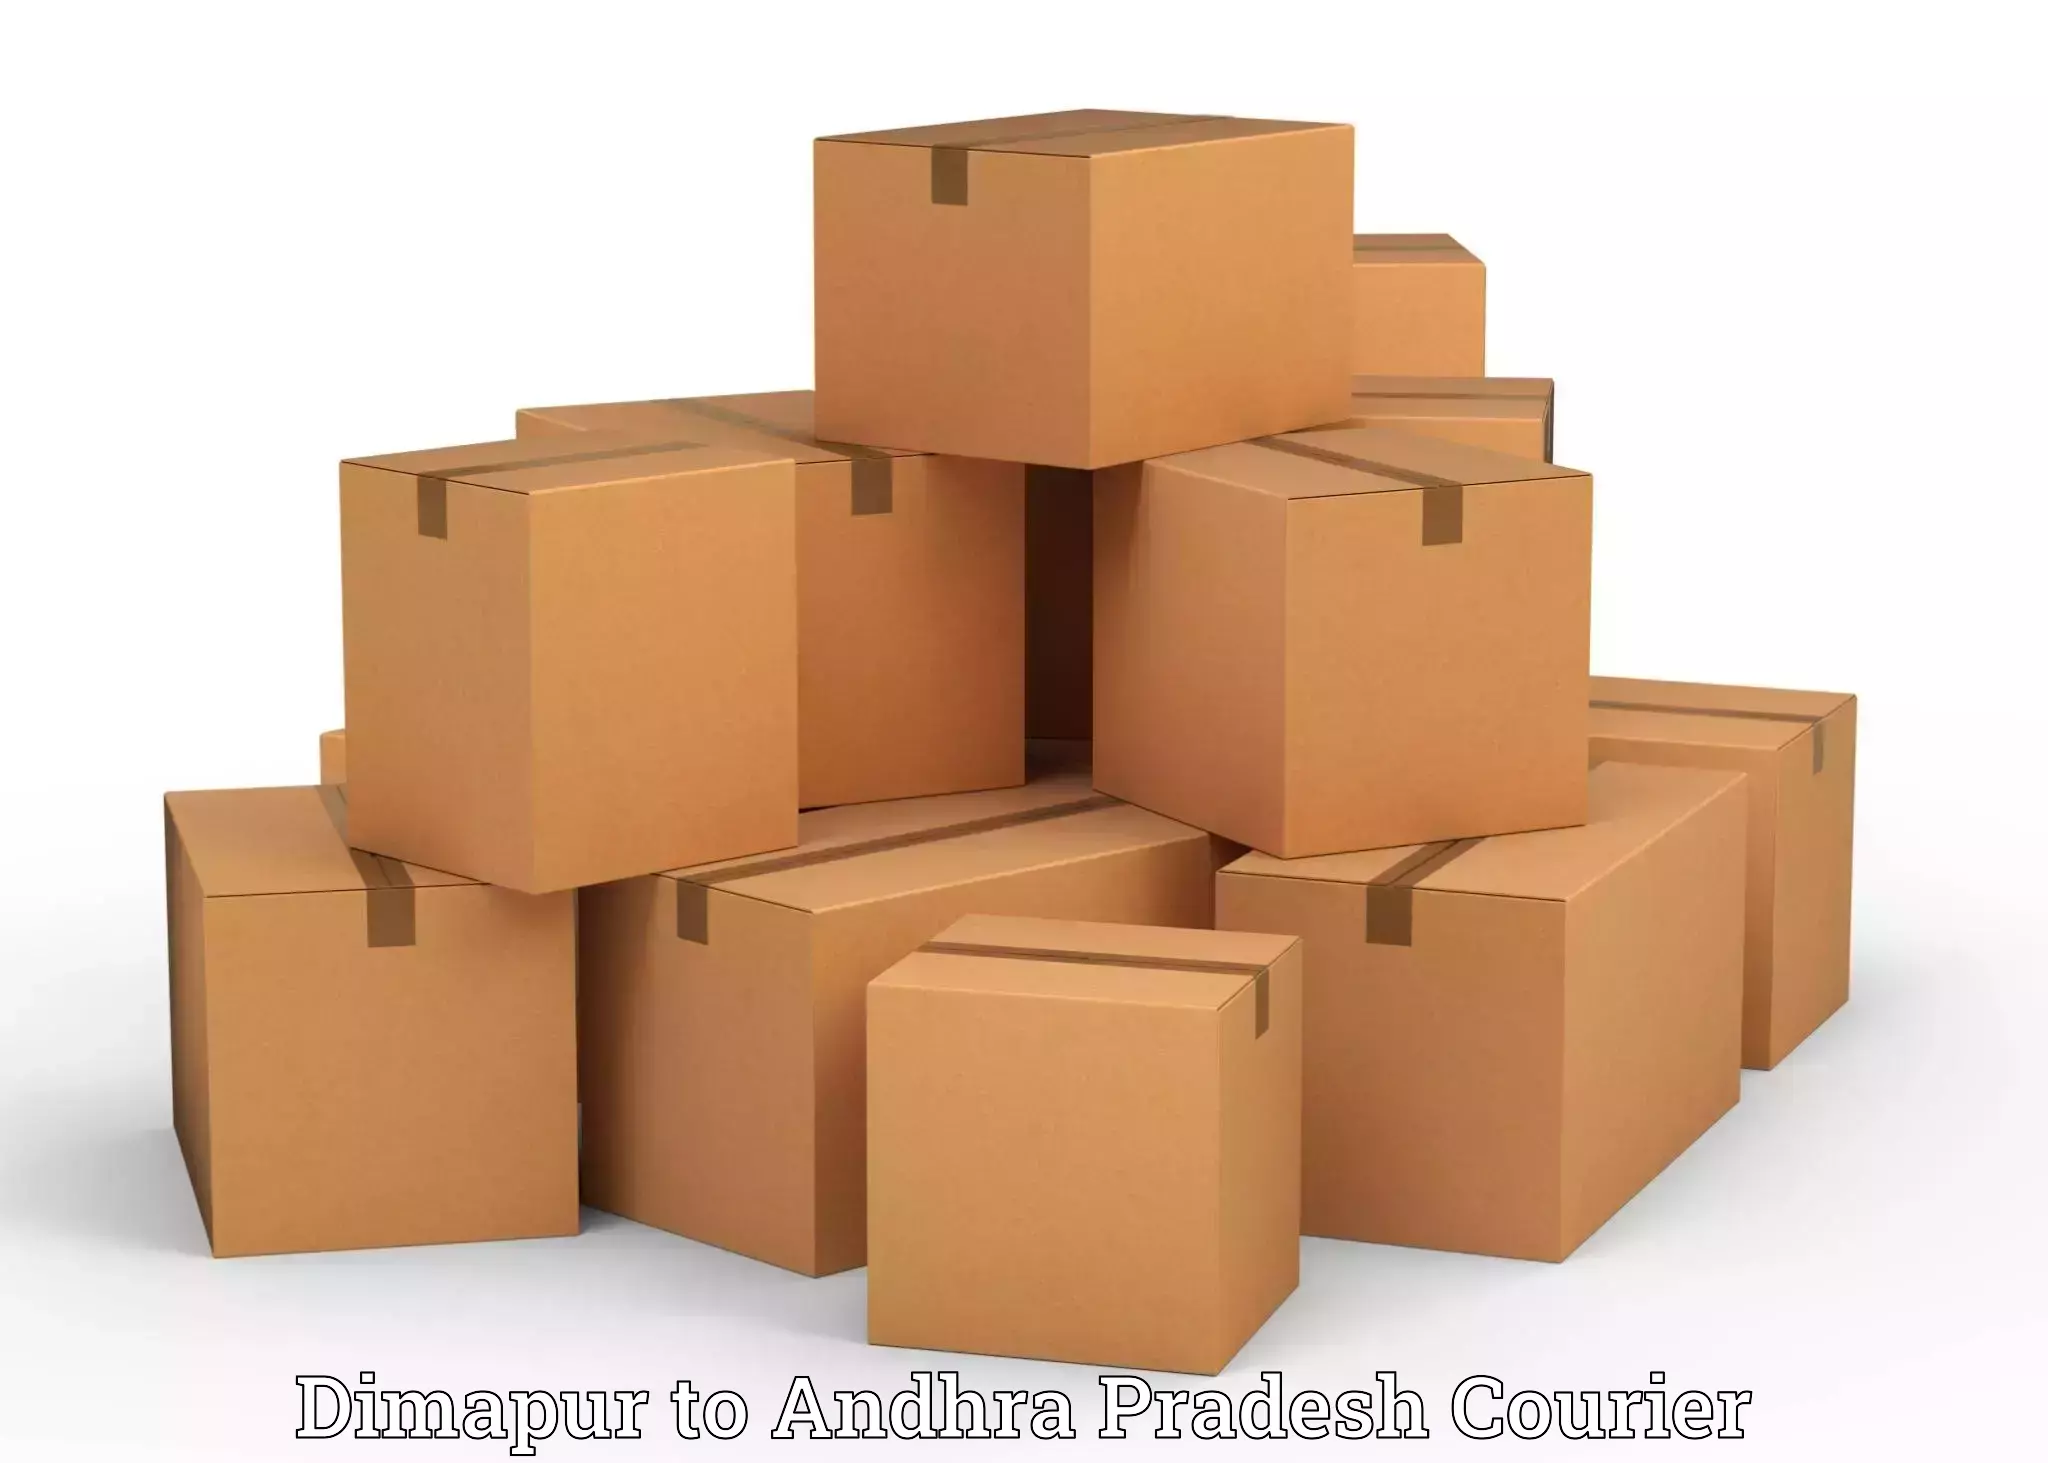 Efficient packing services in Dimapur to Visakhapatnam Port